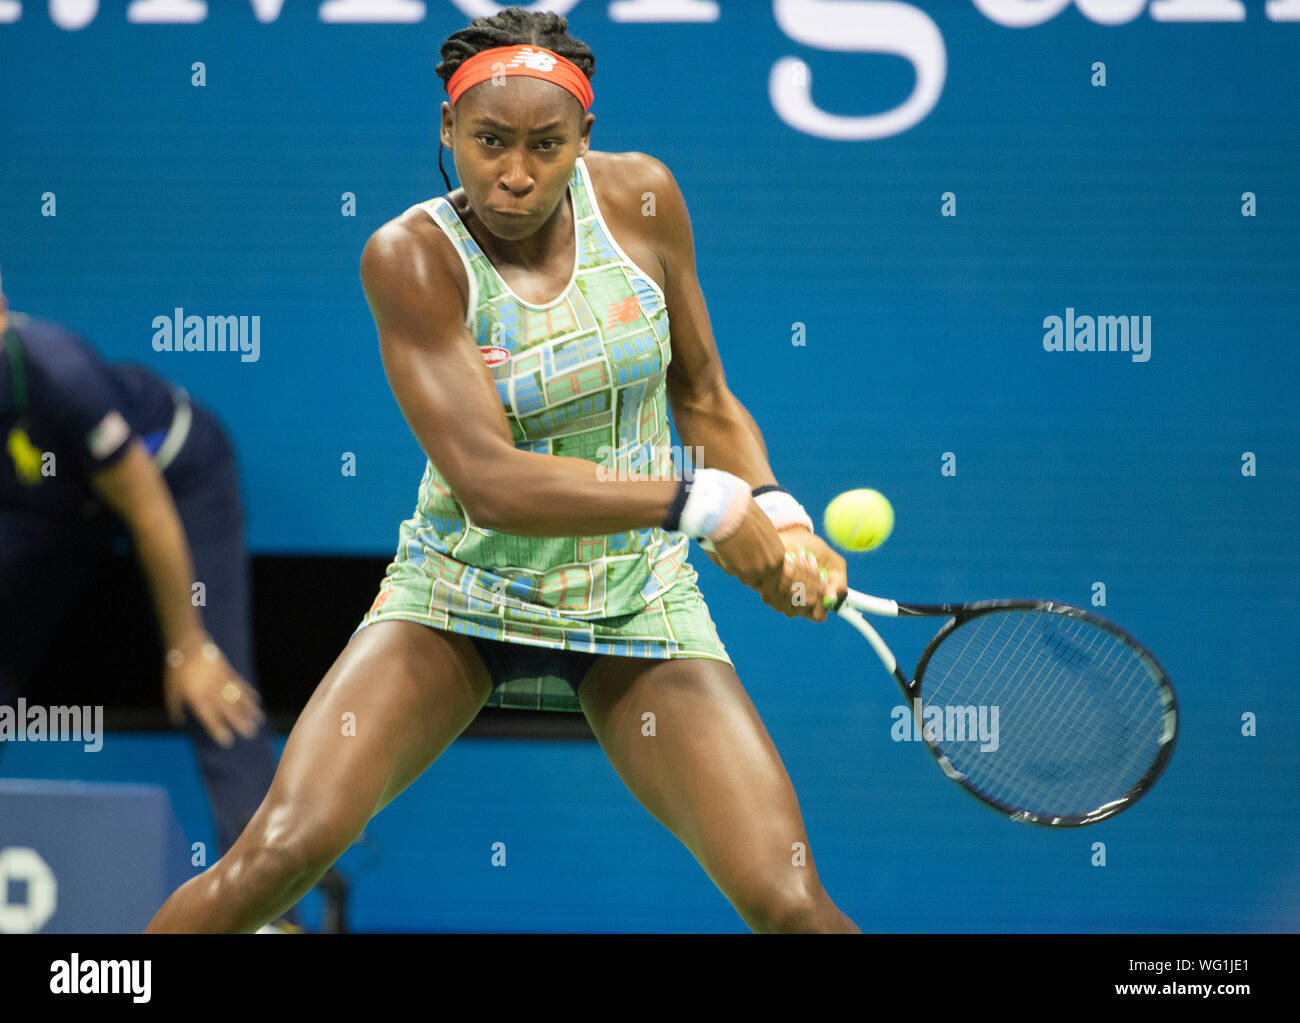 New York, USA. 31st Aug, 2019. August 31, 2019: Coco Gauff (SA) loses to  Naomi Osaka (JPN) 6-3, 6-0, at the US Open being played at Billie Jean King  National Tennis Center